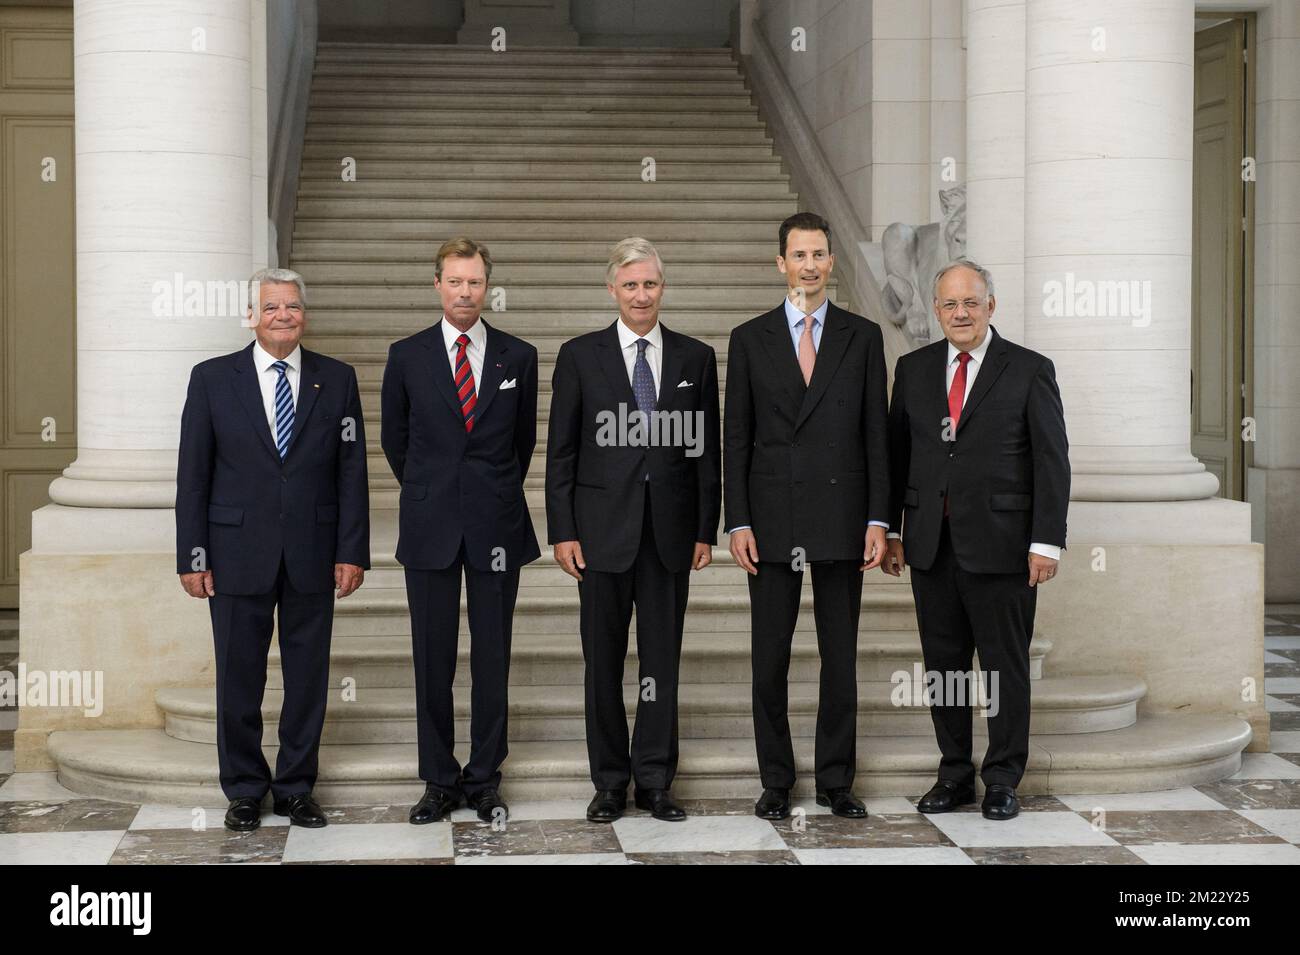 German President Joachim Gauck, Grand Duke Henri of Luxembourg, King Philippe - Filip of Belgium, Hereditary Prince of Liechtenstein, Alois and Swiss Confederation President Johann Schneider-Ammann pictured during a gala dinner at the Laeken/Laken royal Palace in Brussels, for the thirteenth informal summit of German-speaking head of states, on Wednesday 07 September 2016.  Stock Photo